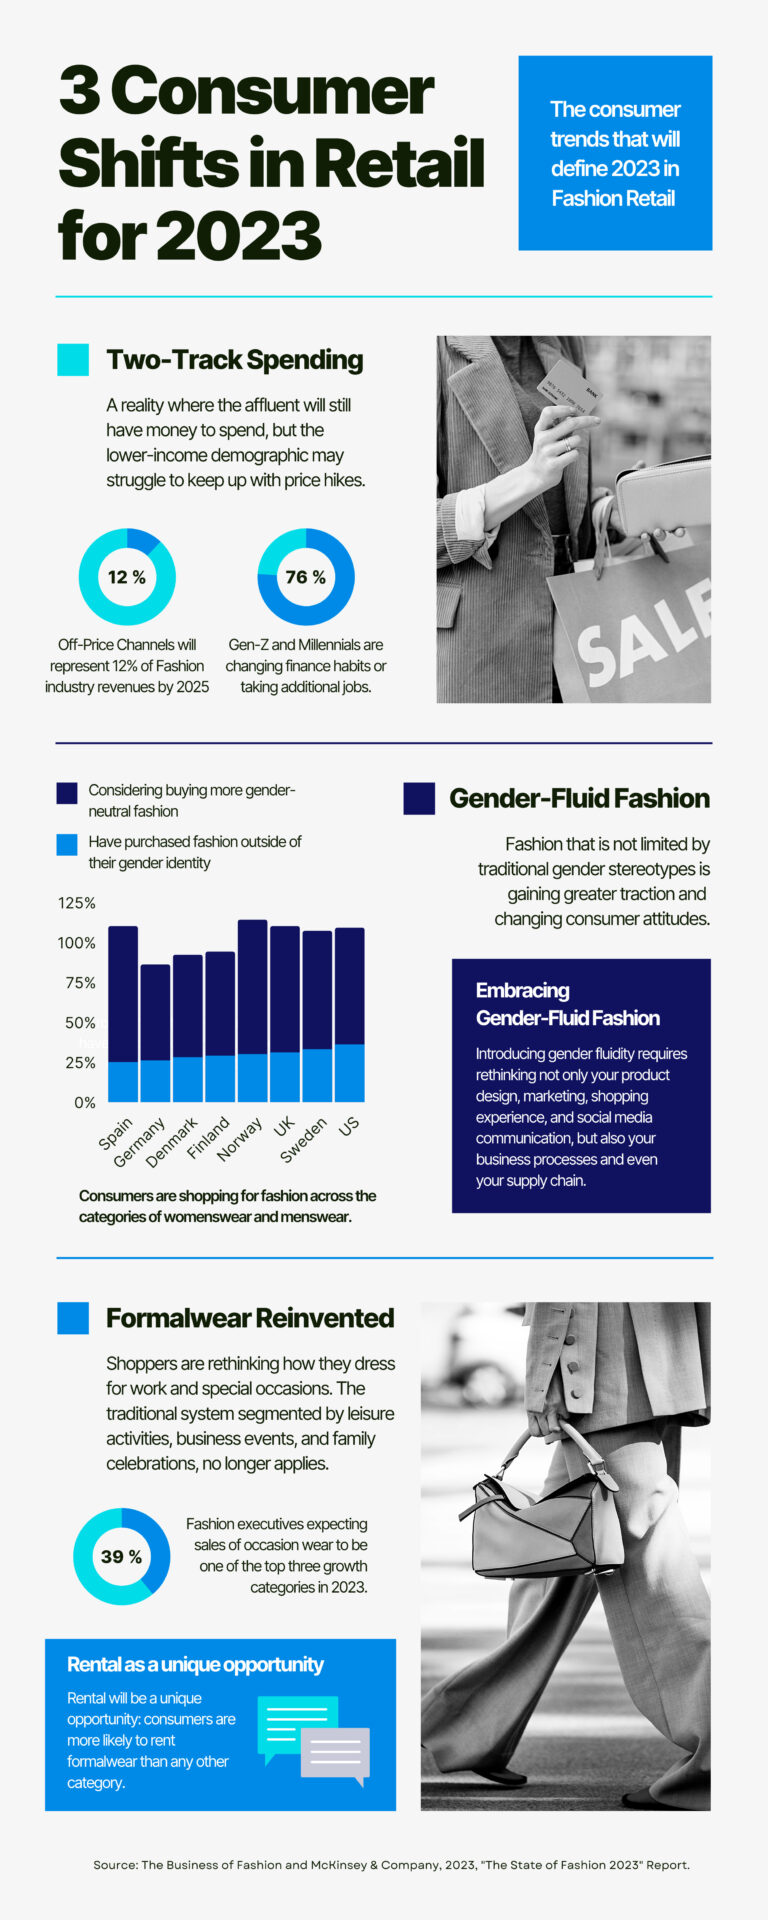 3 Consumer Shifts in Retail for 2023 Infographic